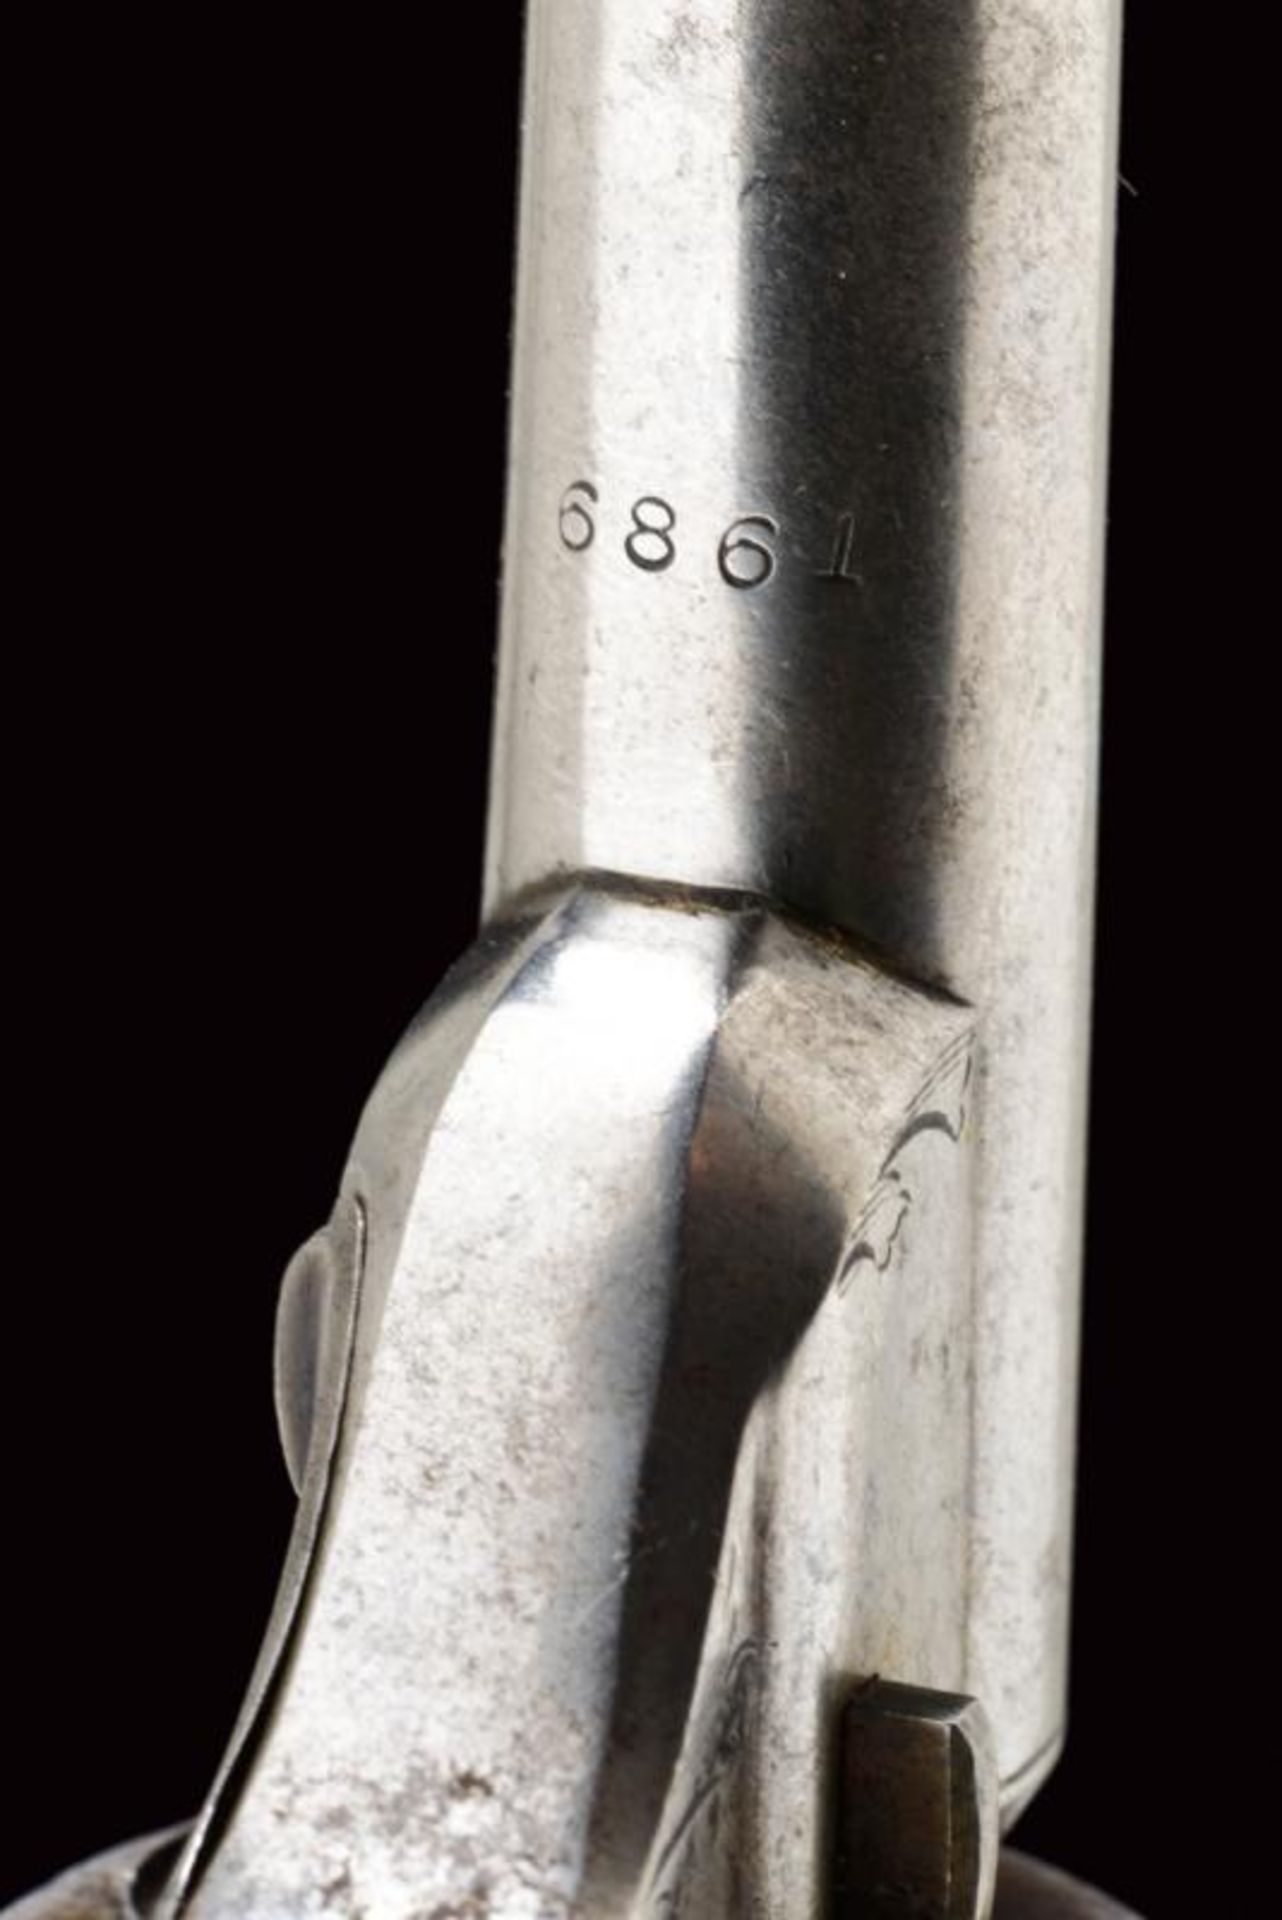 A cased Moore's Patent Firearms Co. Front Loading Revolver - Image 3 of 7